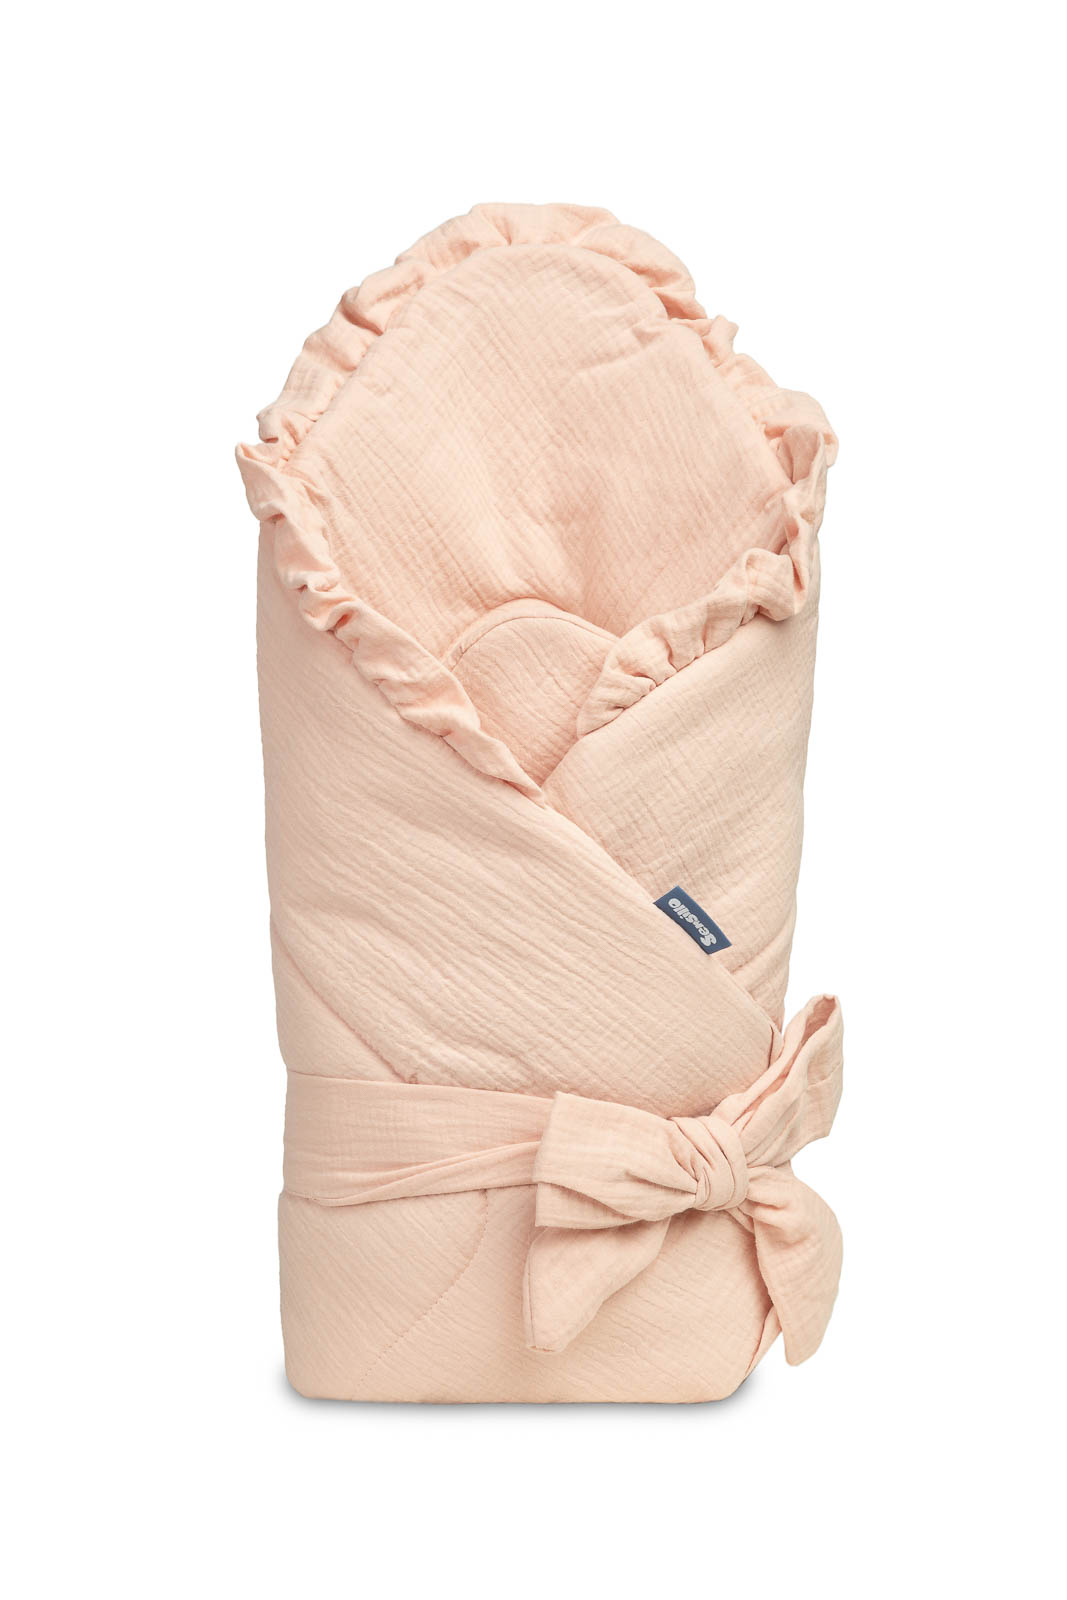 Baby wrap 90×90 – Icing